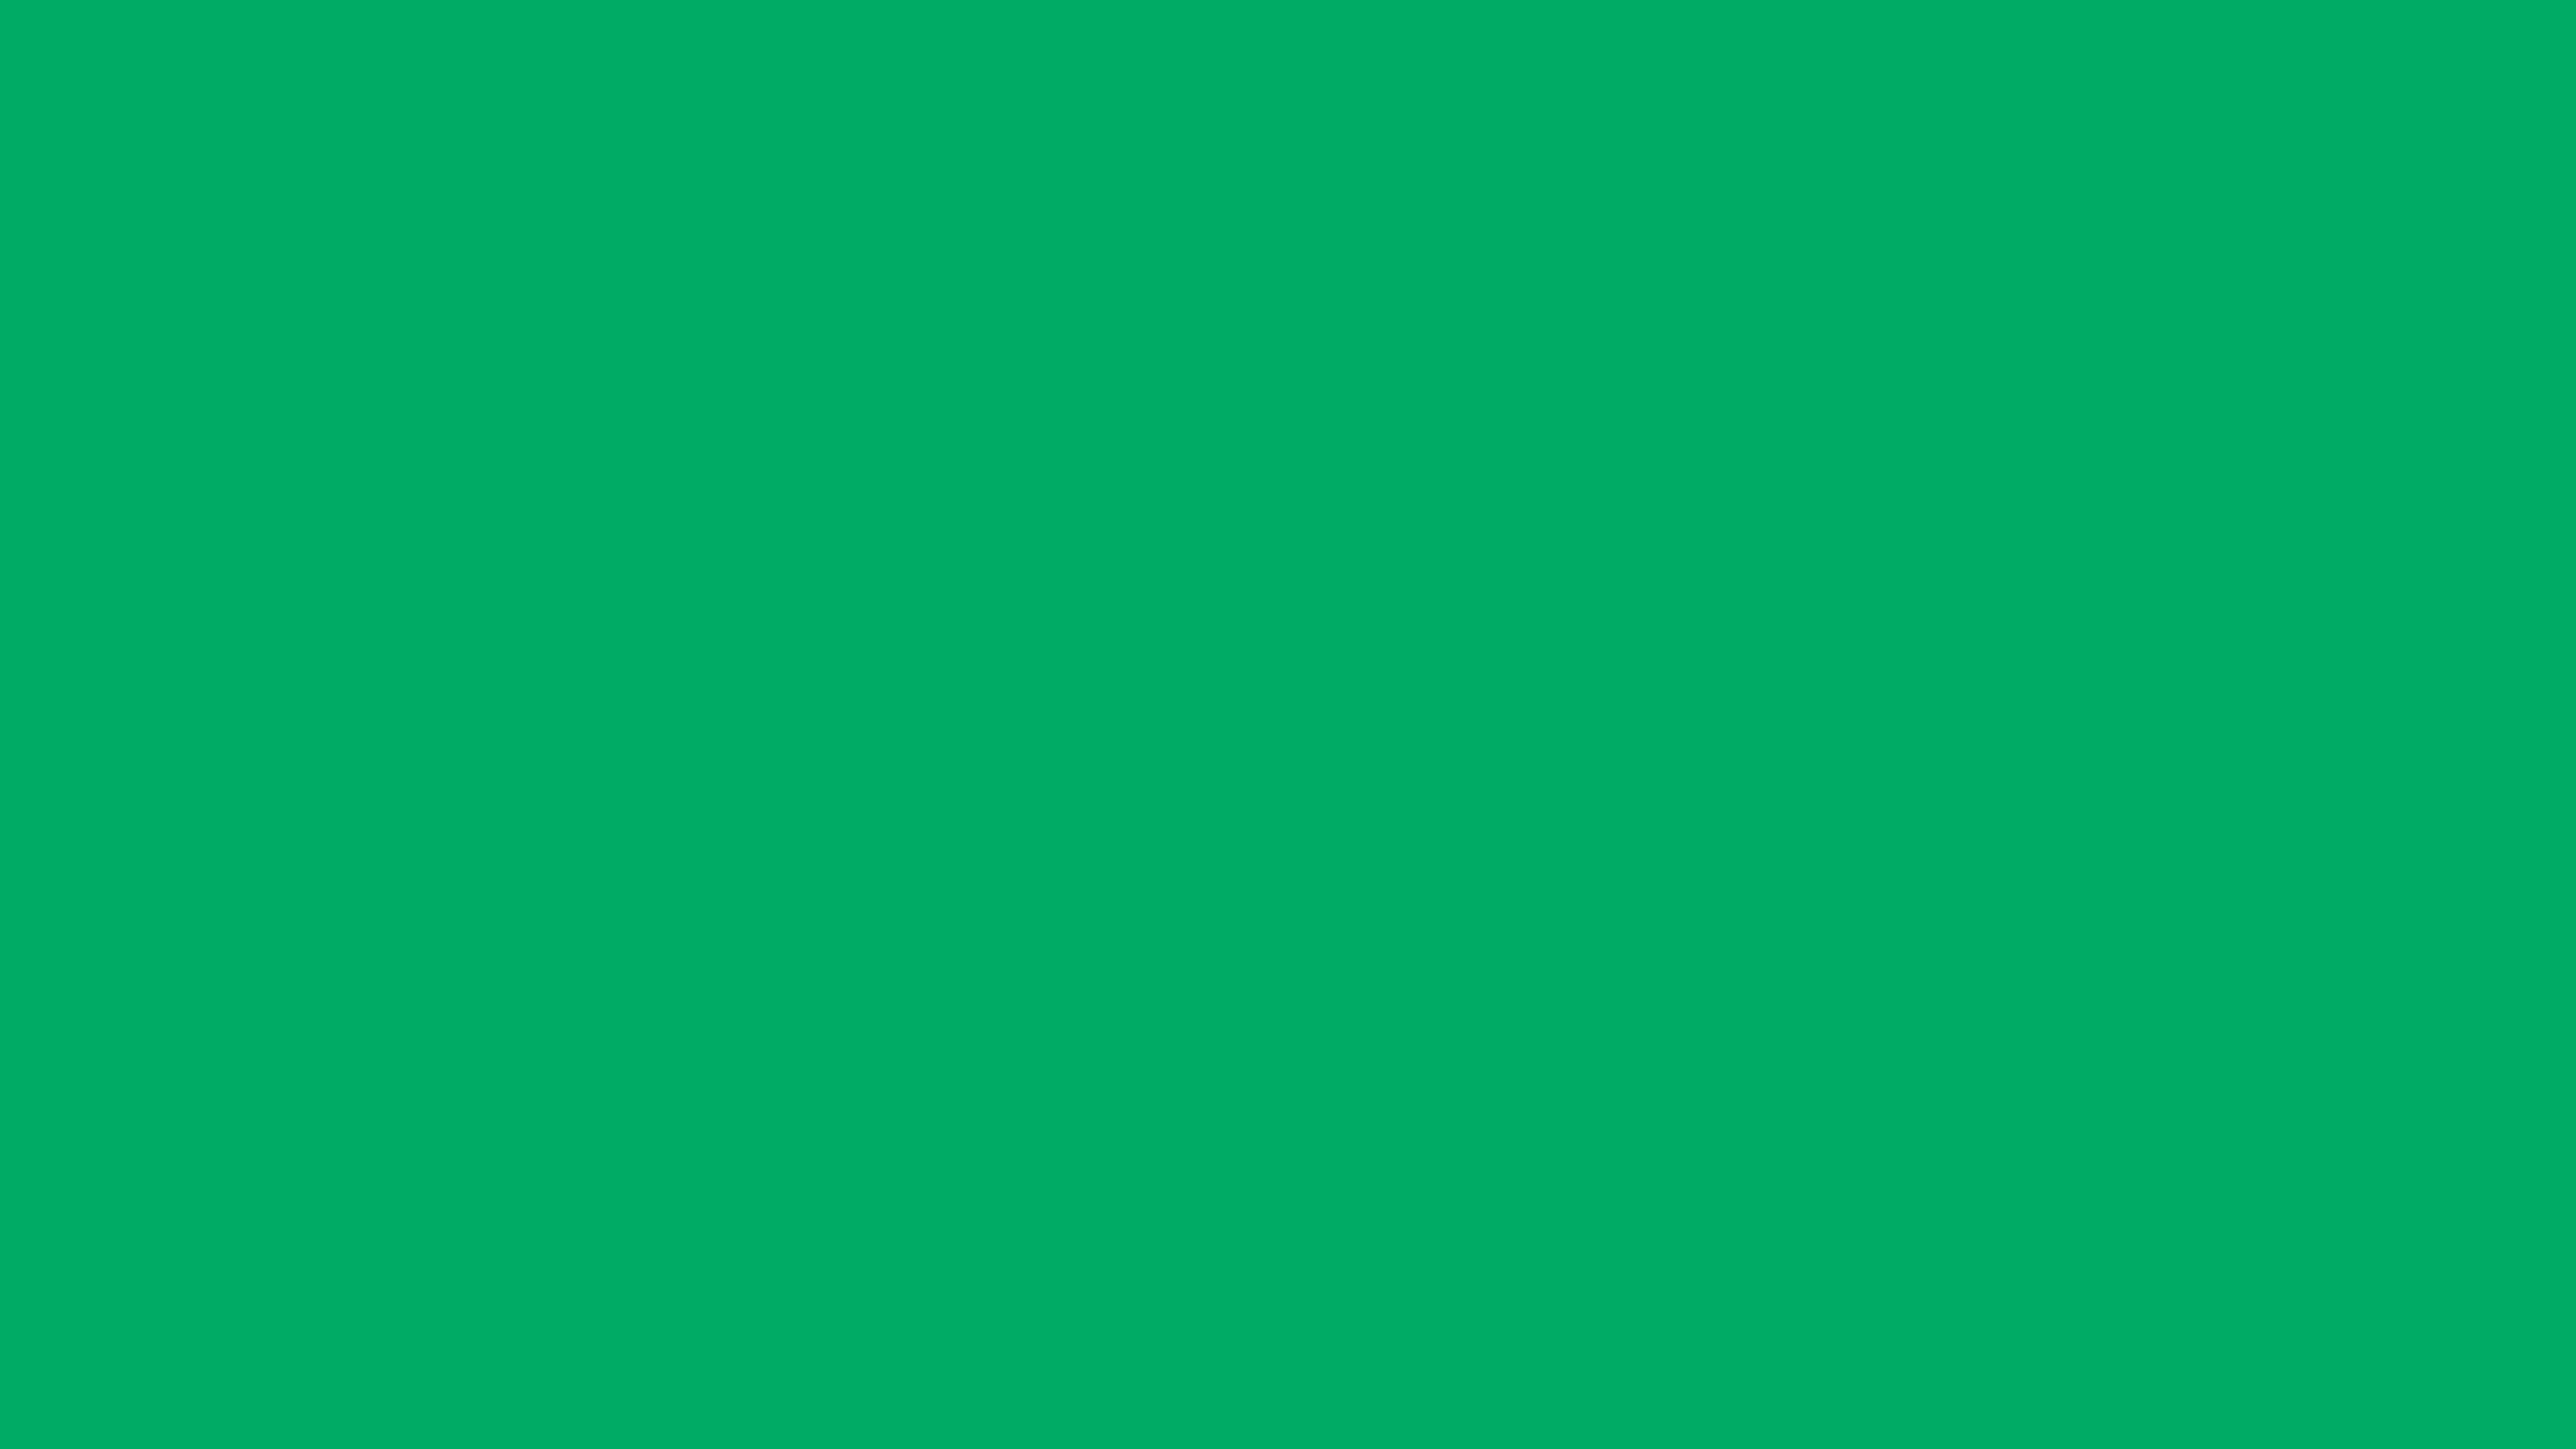 7680x4320 GO Green Solid Color Background